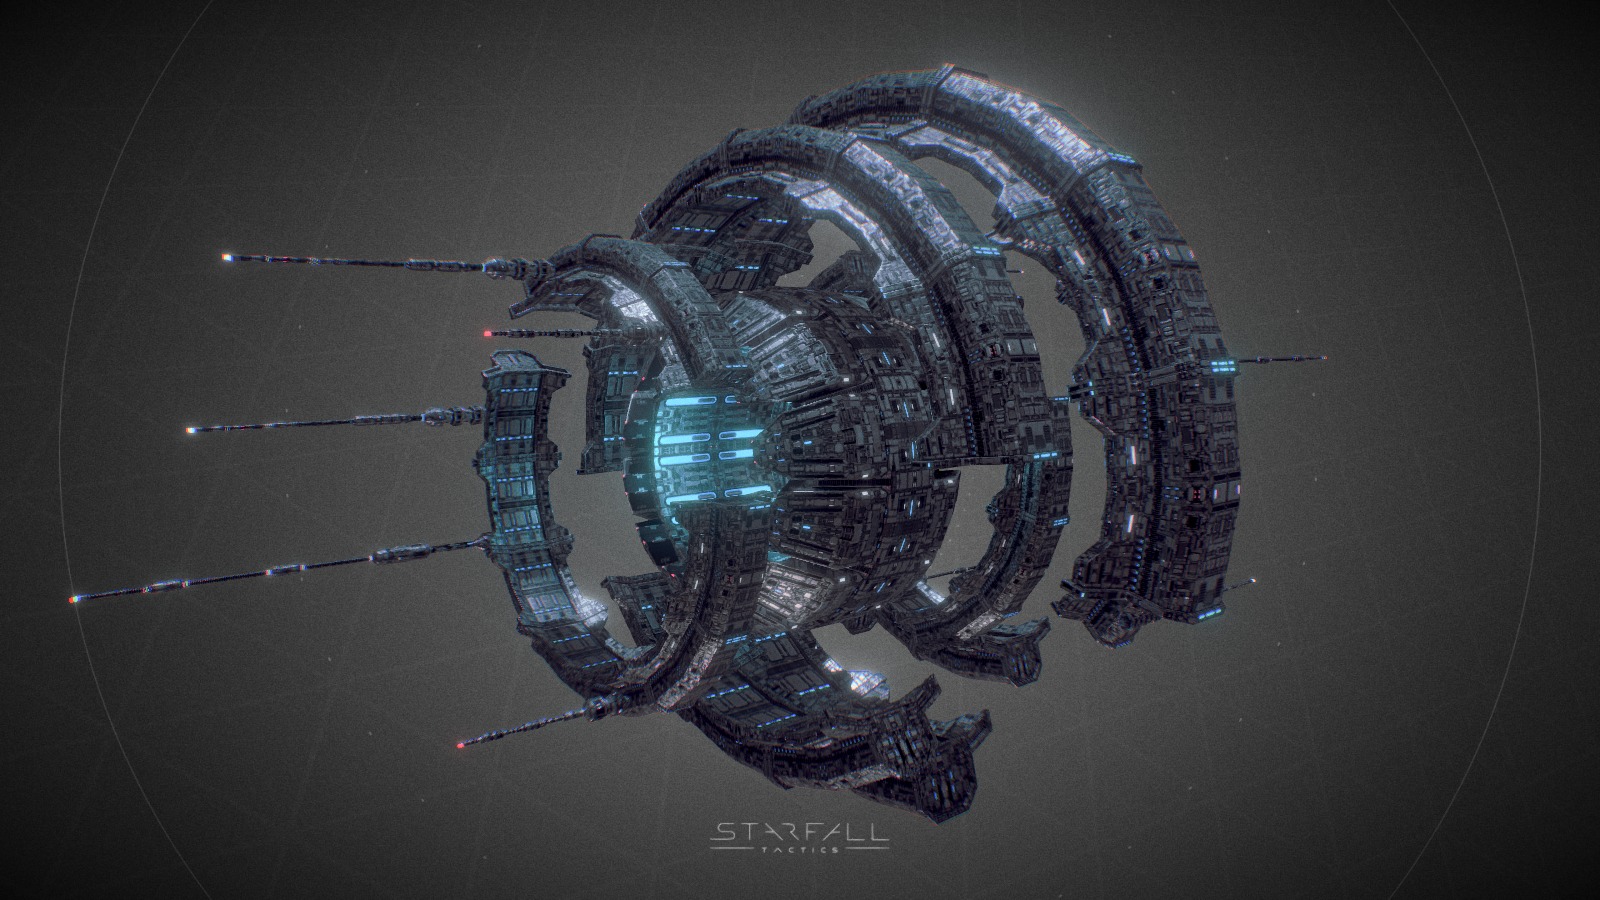 In-game model of a warp gate built for travel between distant star systems.
Learn more about the game at http://starfalltactics.com/ - Starfall Tactics — Warp gate - 3D model by Snowforged Entertainment (@snowforged) 3d model